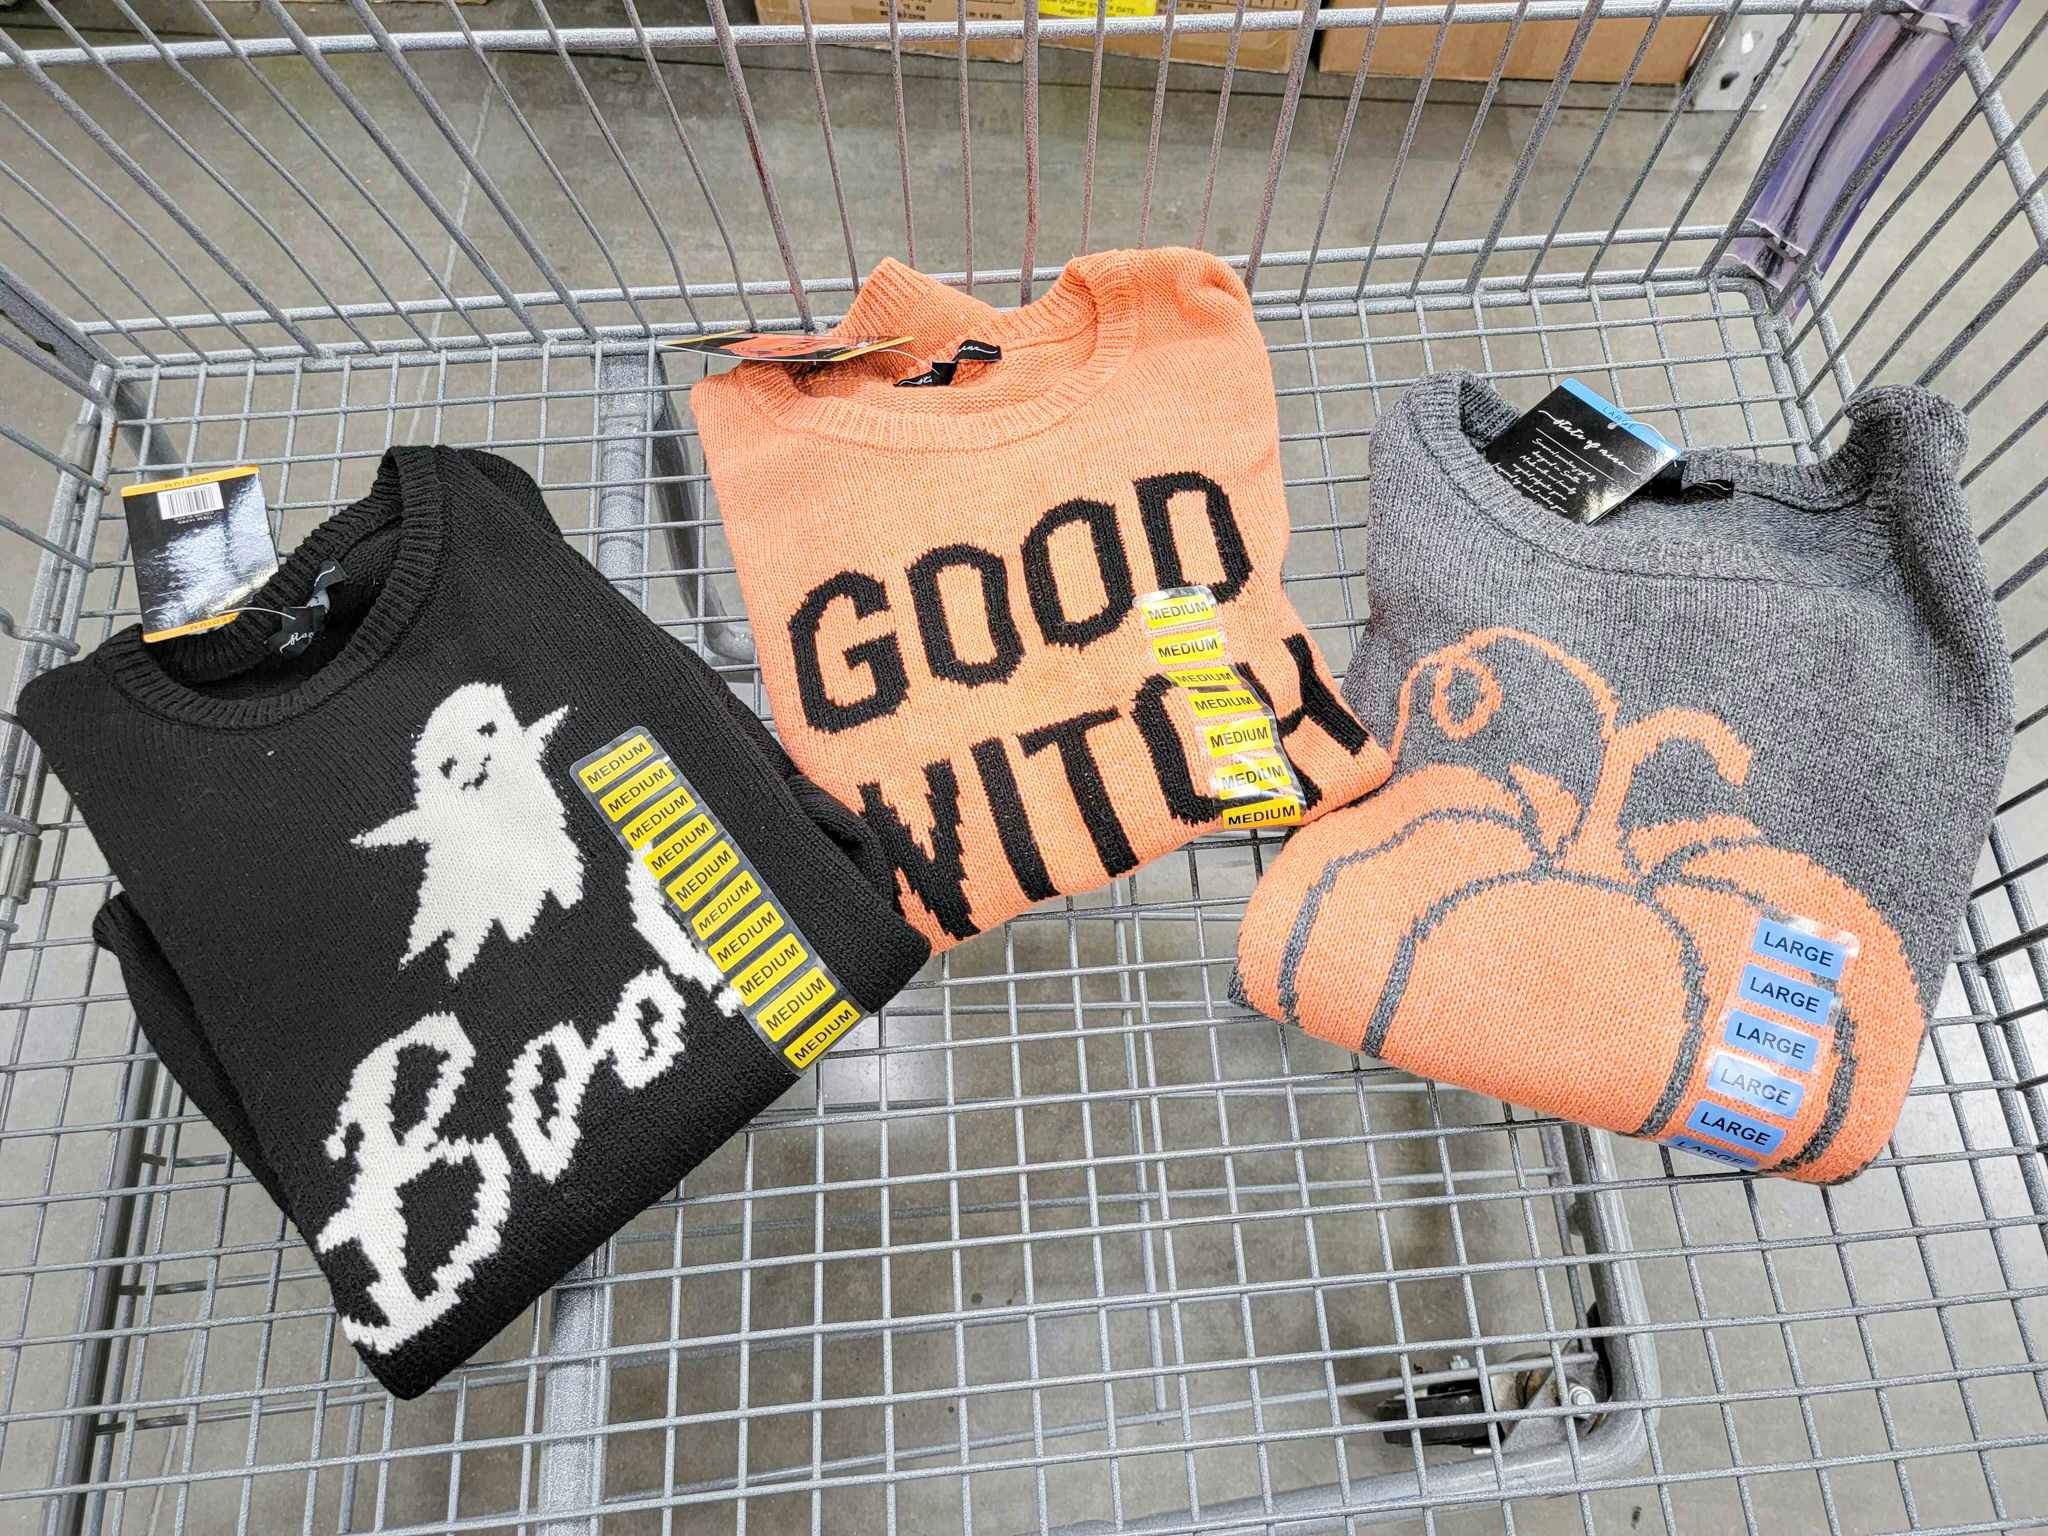 3 ladies halloween sweaters in a cart. Left one is black and says boo with a ghost on it, middle is orange and says good witch, right is grey with an orange pumpkin